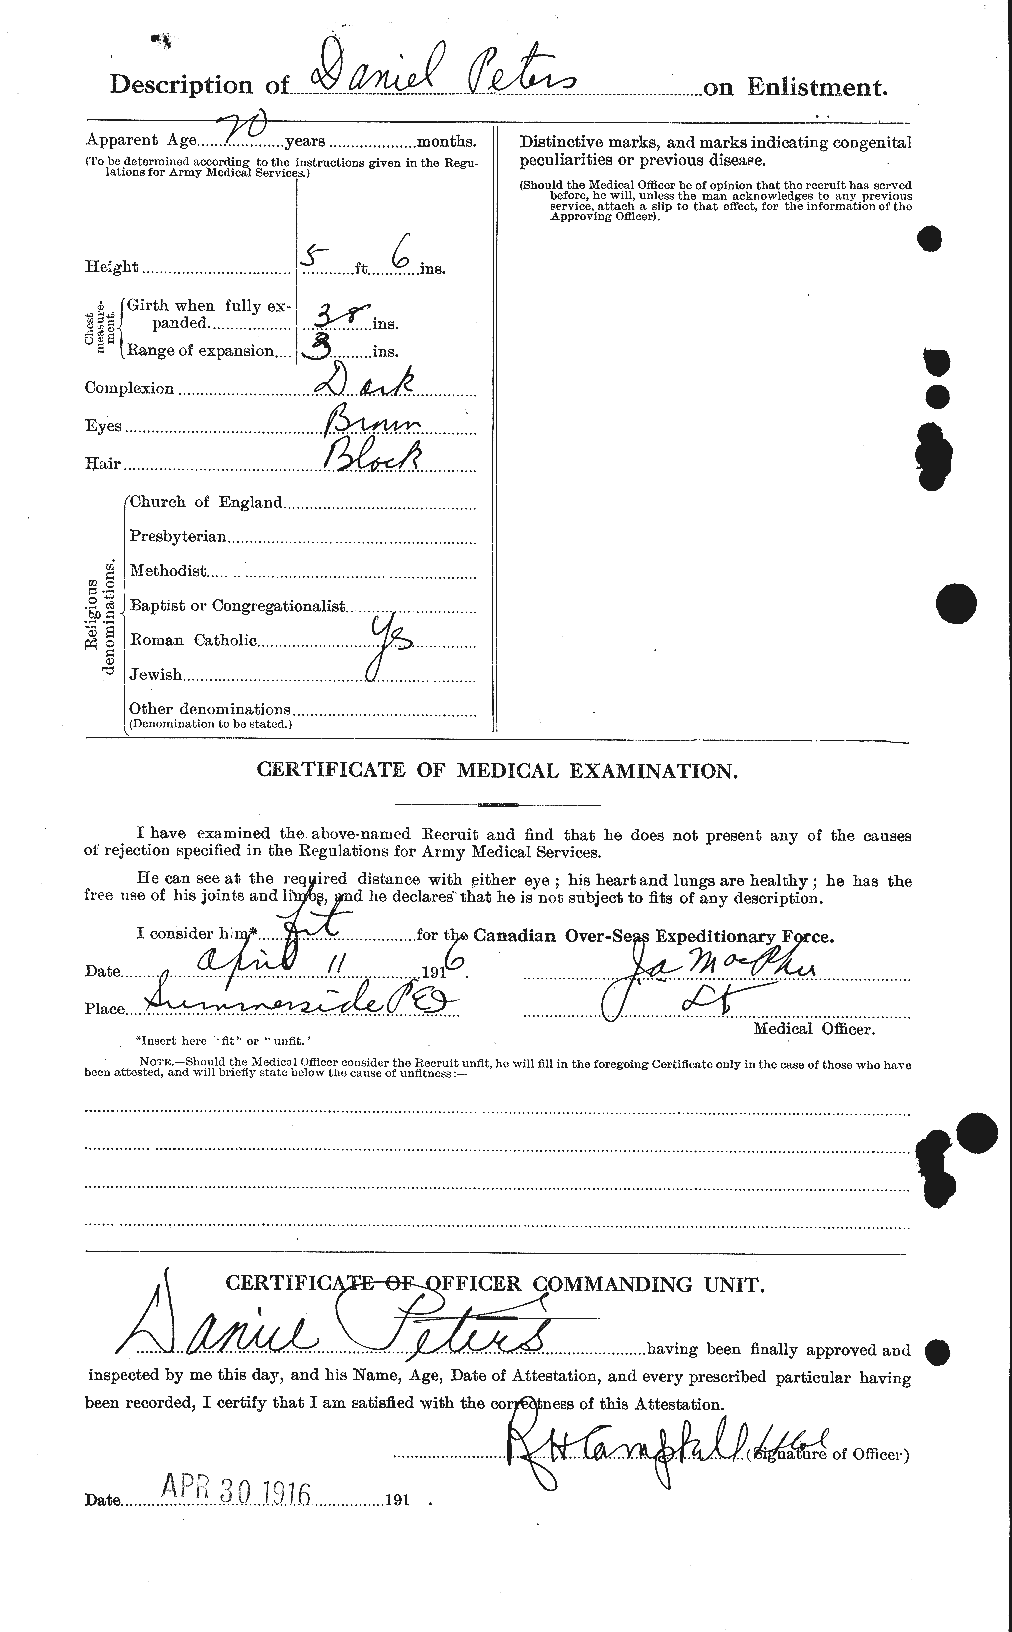 Personnel Records of the First World War - CEF 575382b